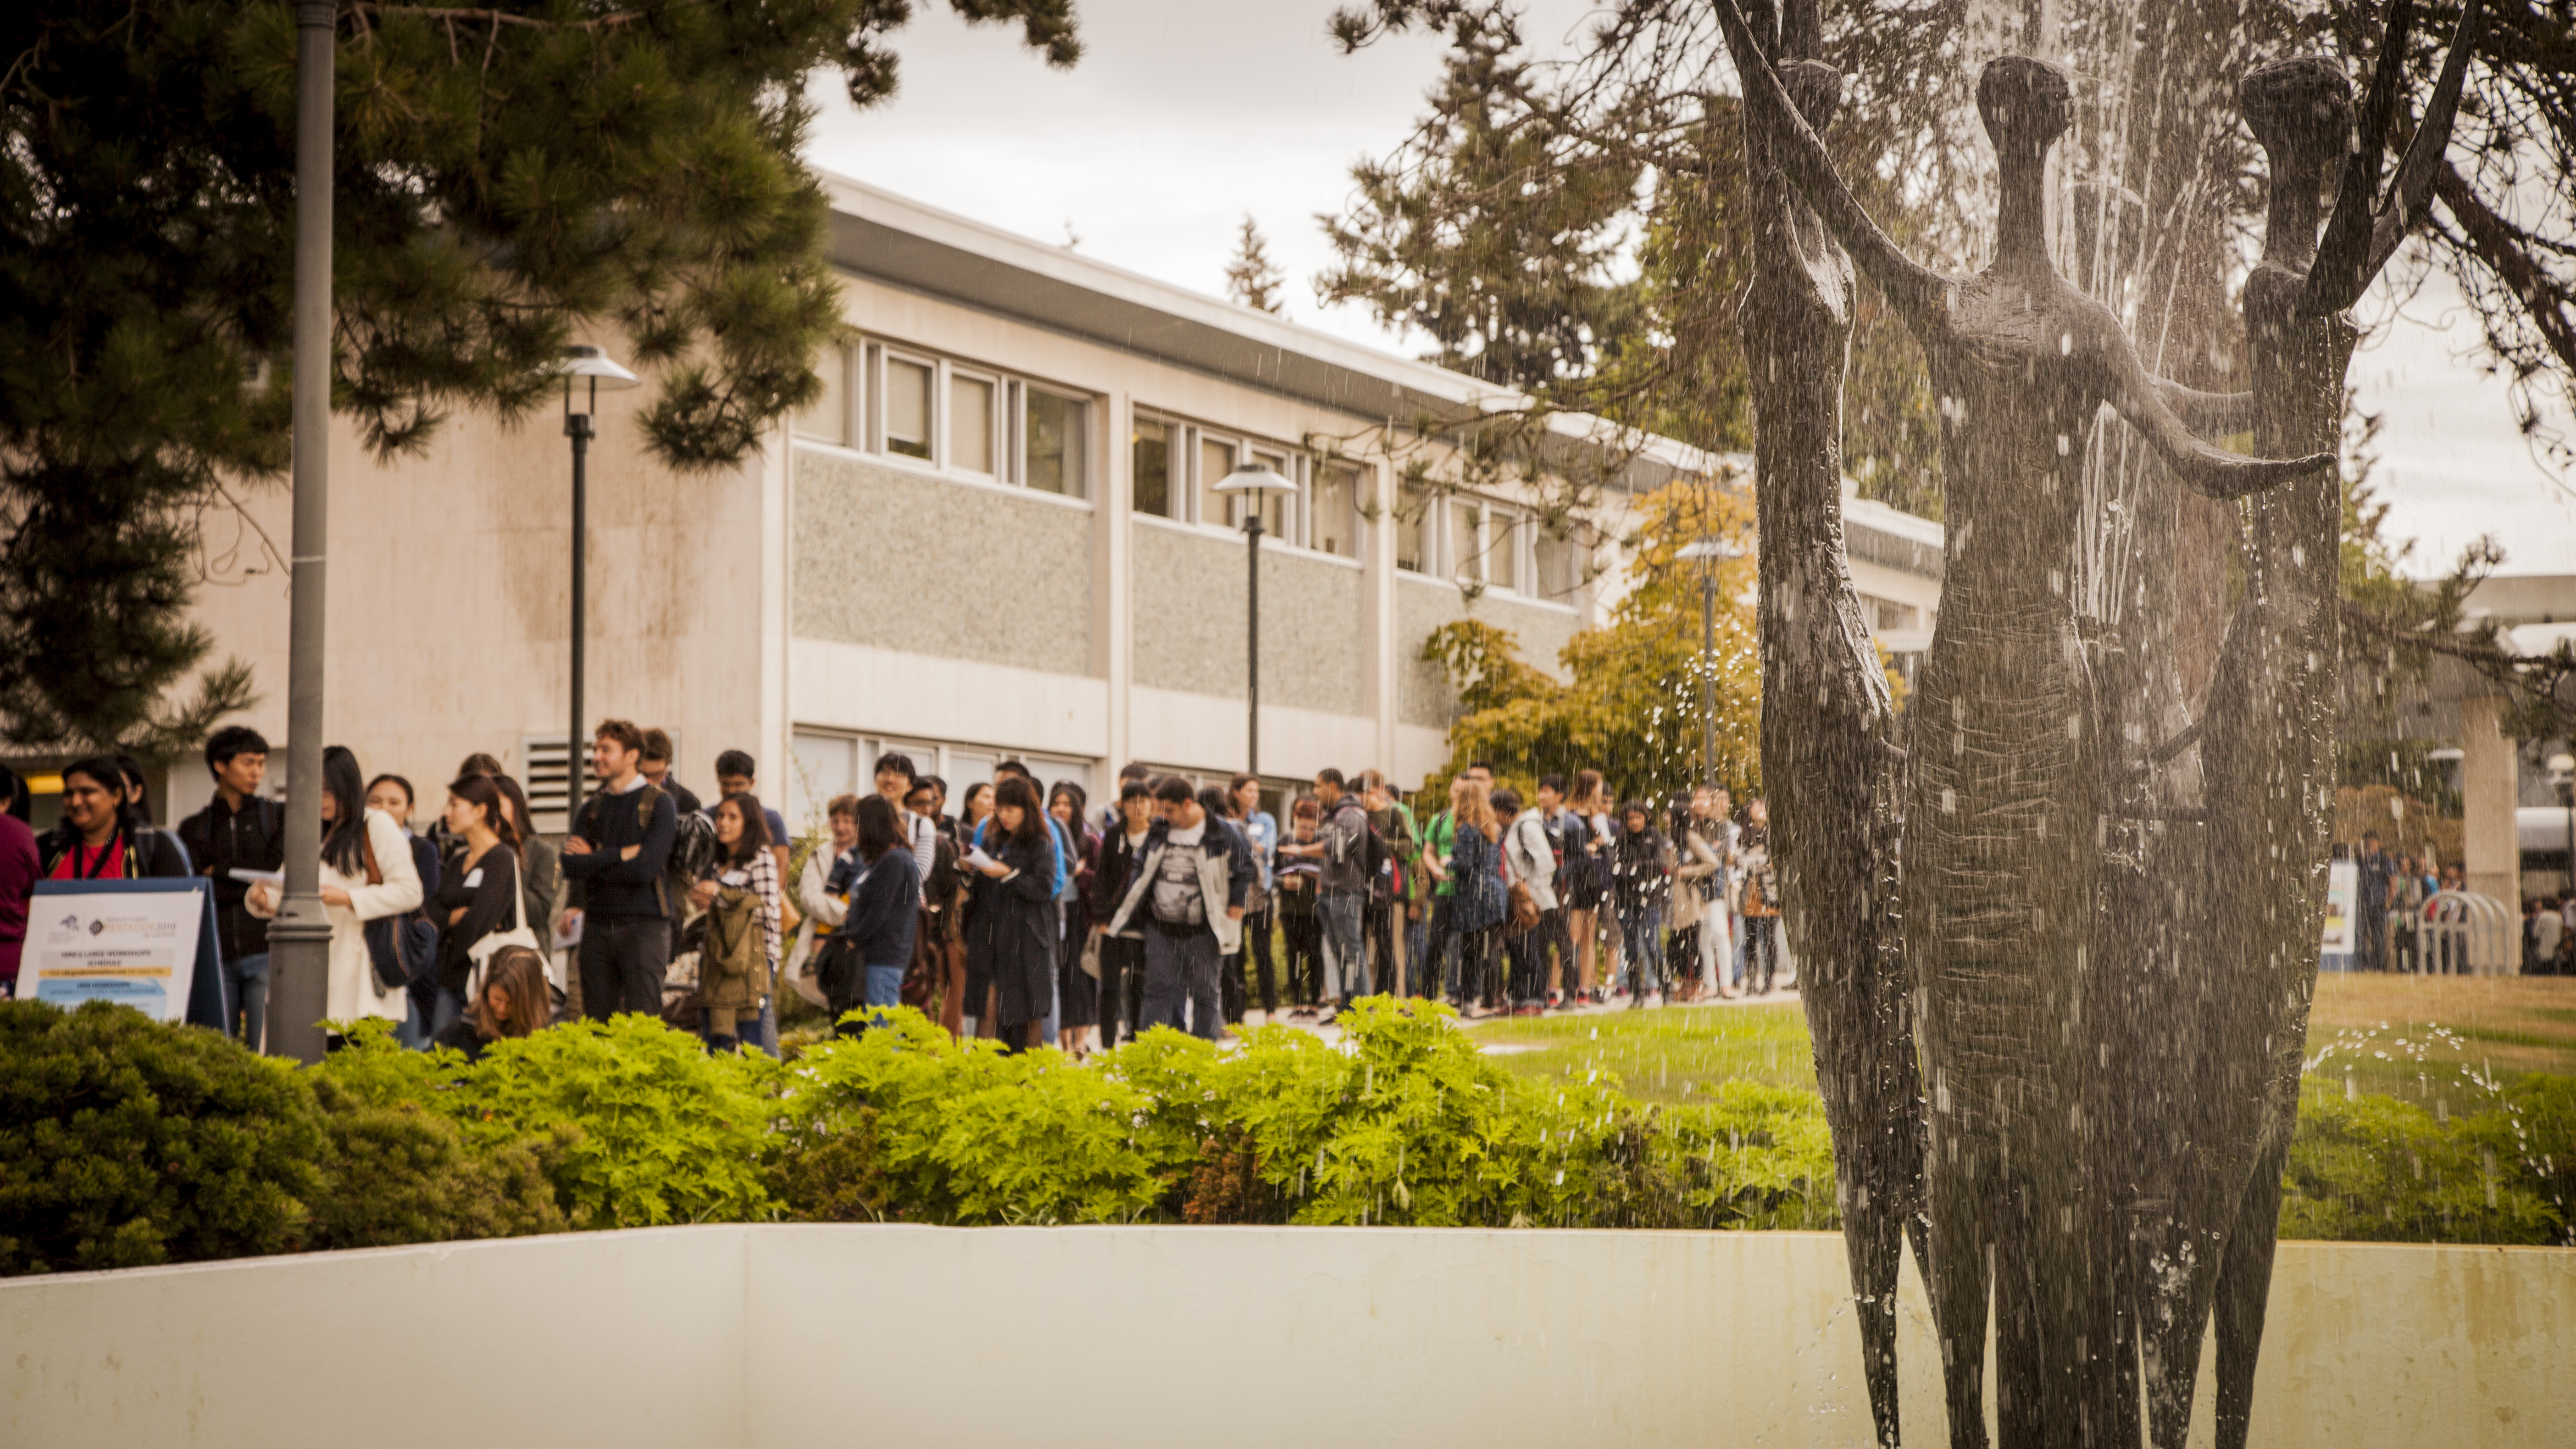 Students line up in front of the University Centre, behind the Trancendence fountain.